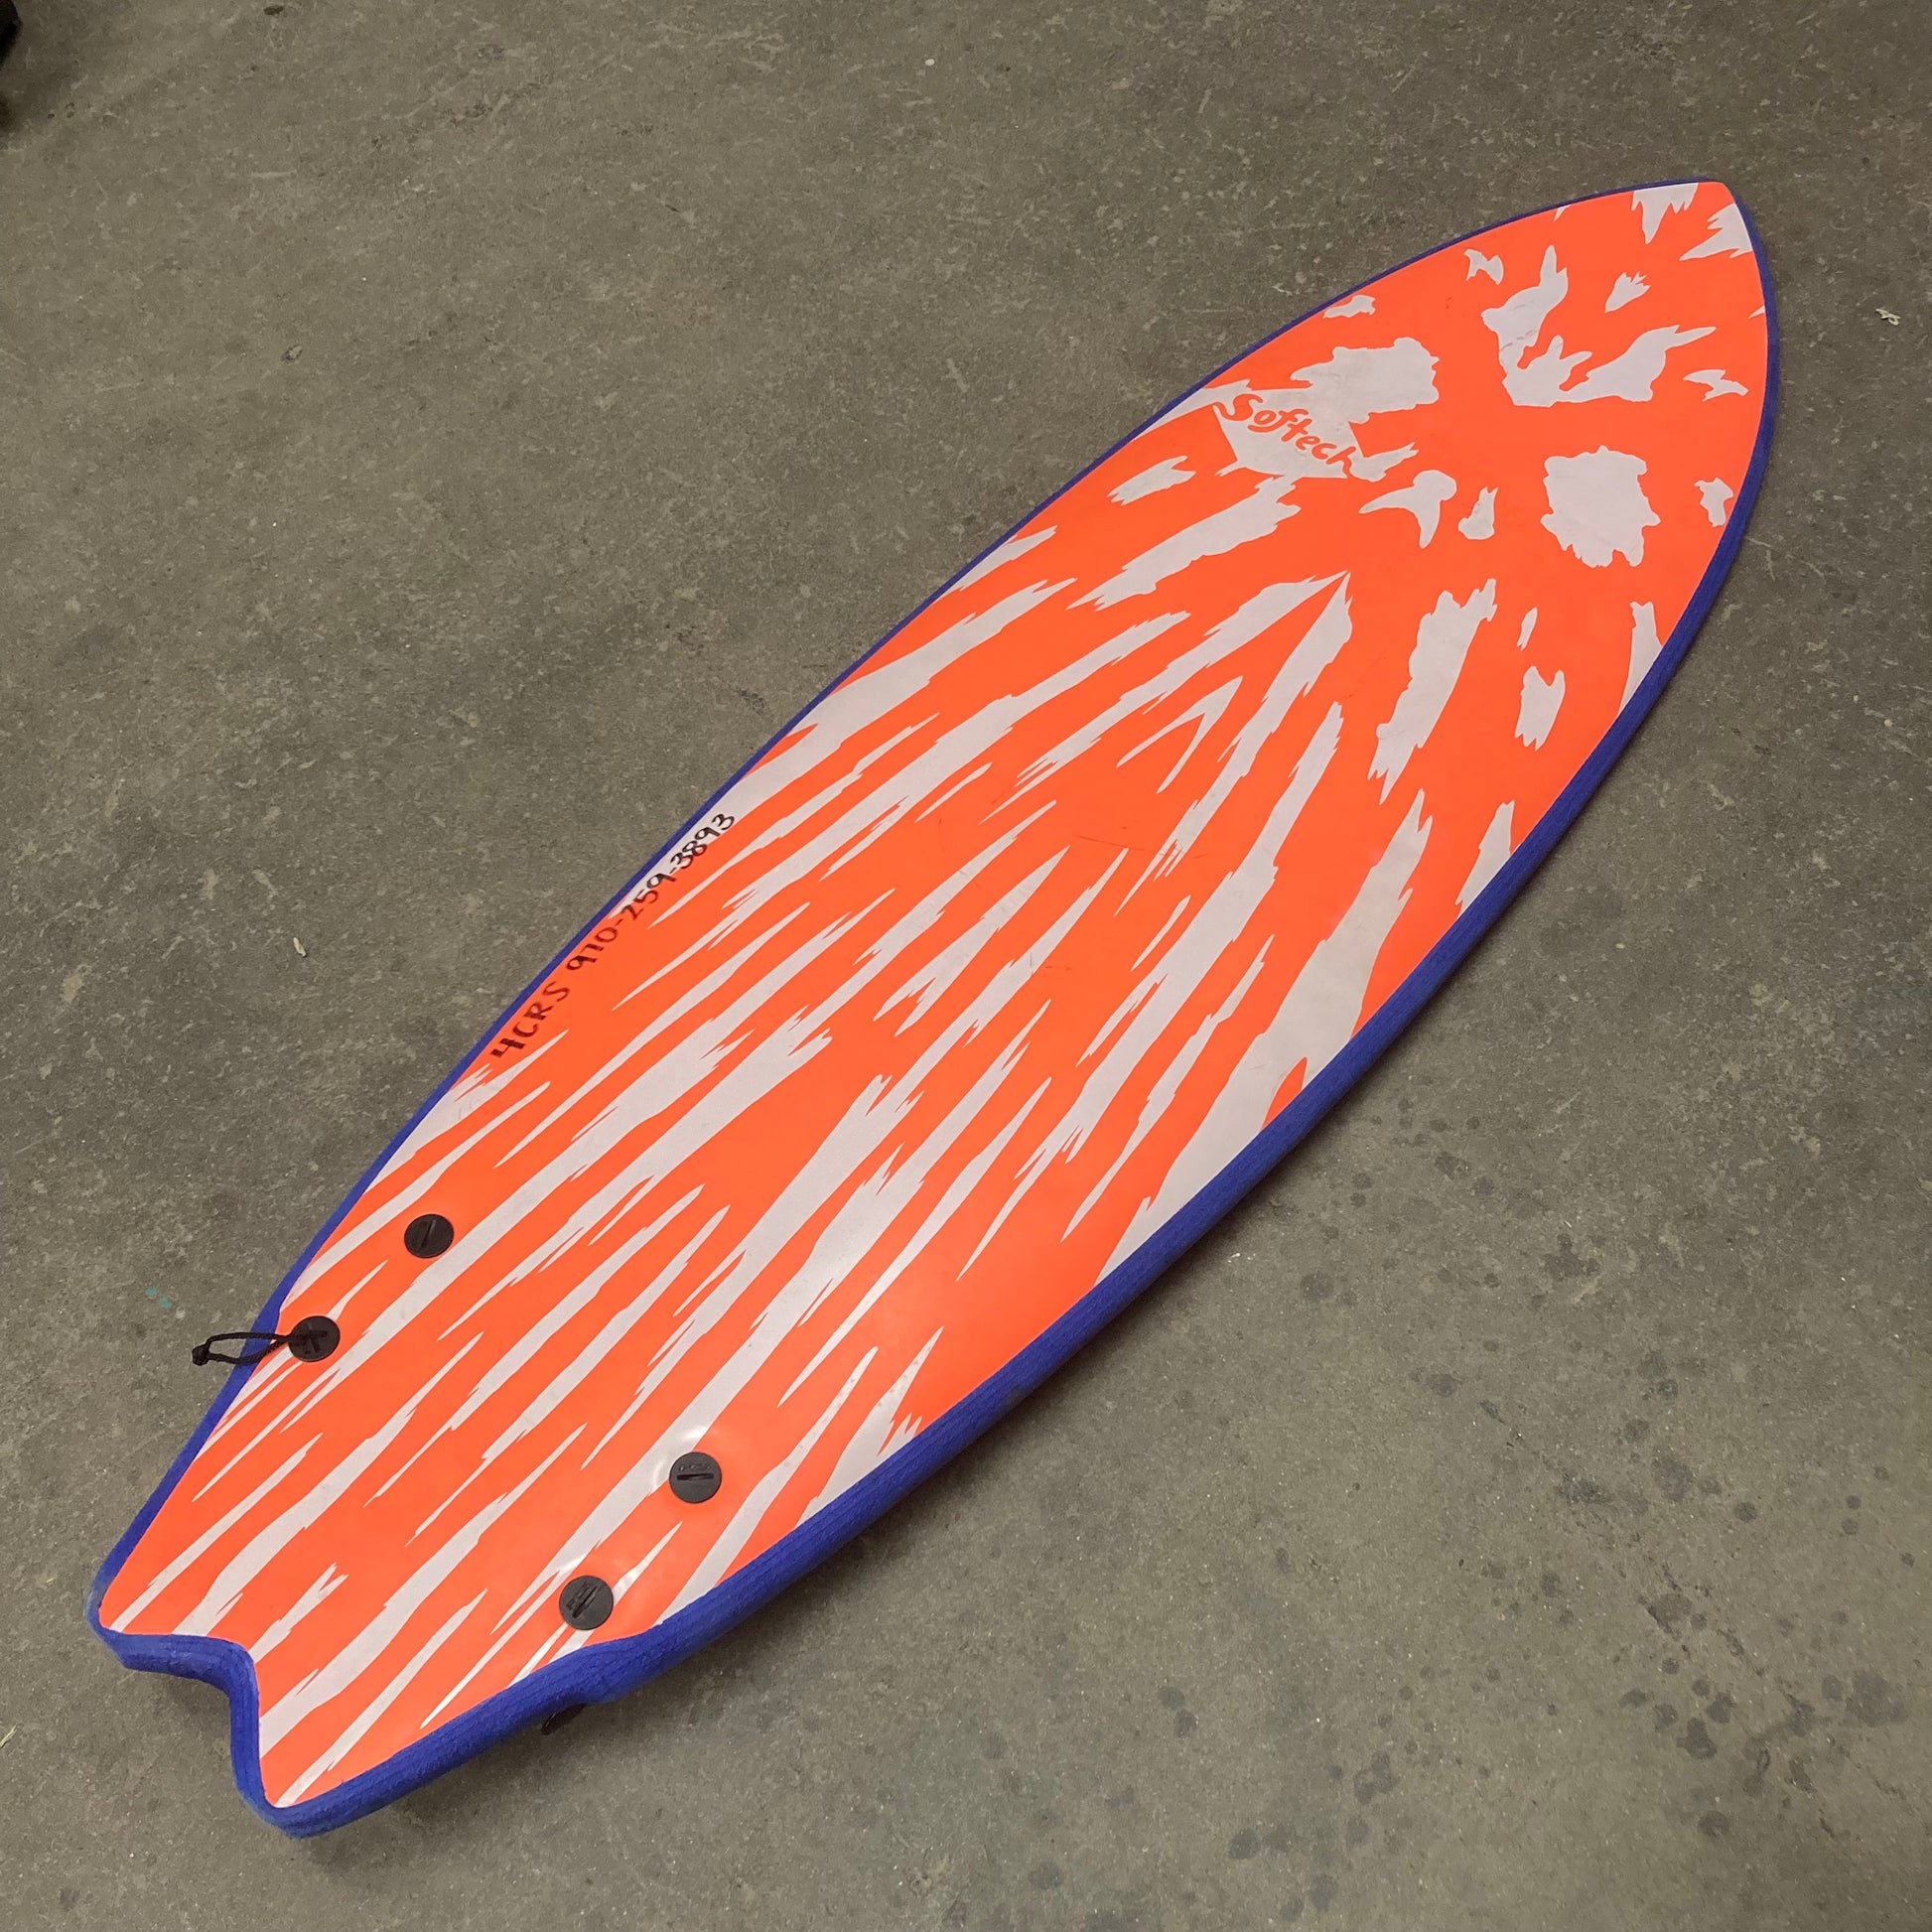 A Demo Mason Twin surfboard with an orange and blue design by FCS.